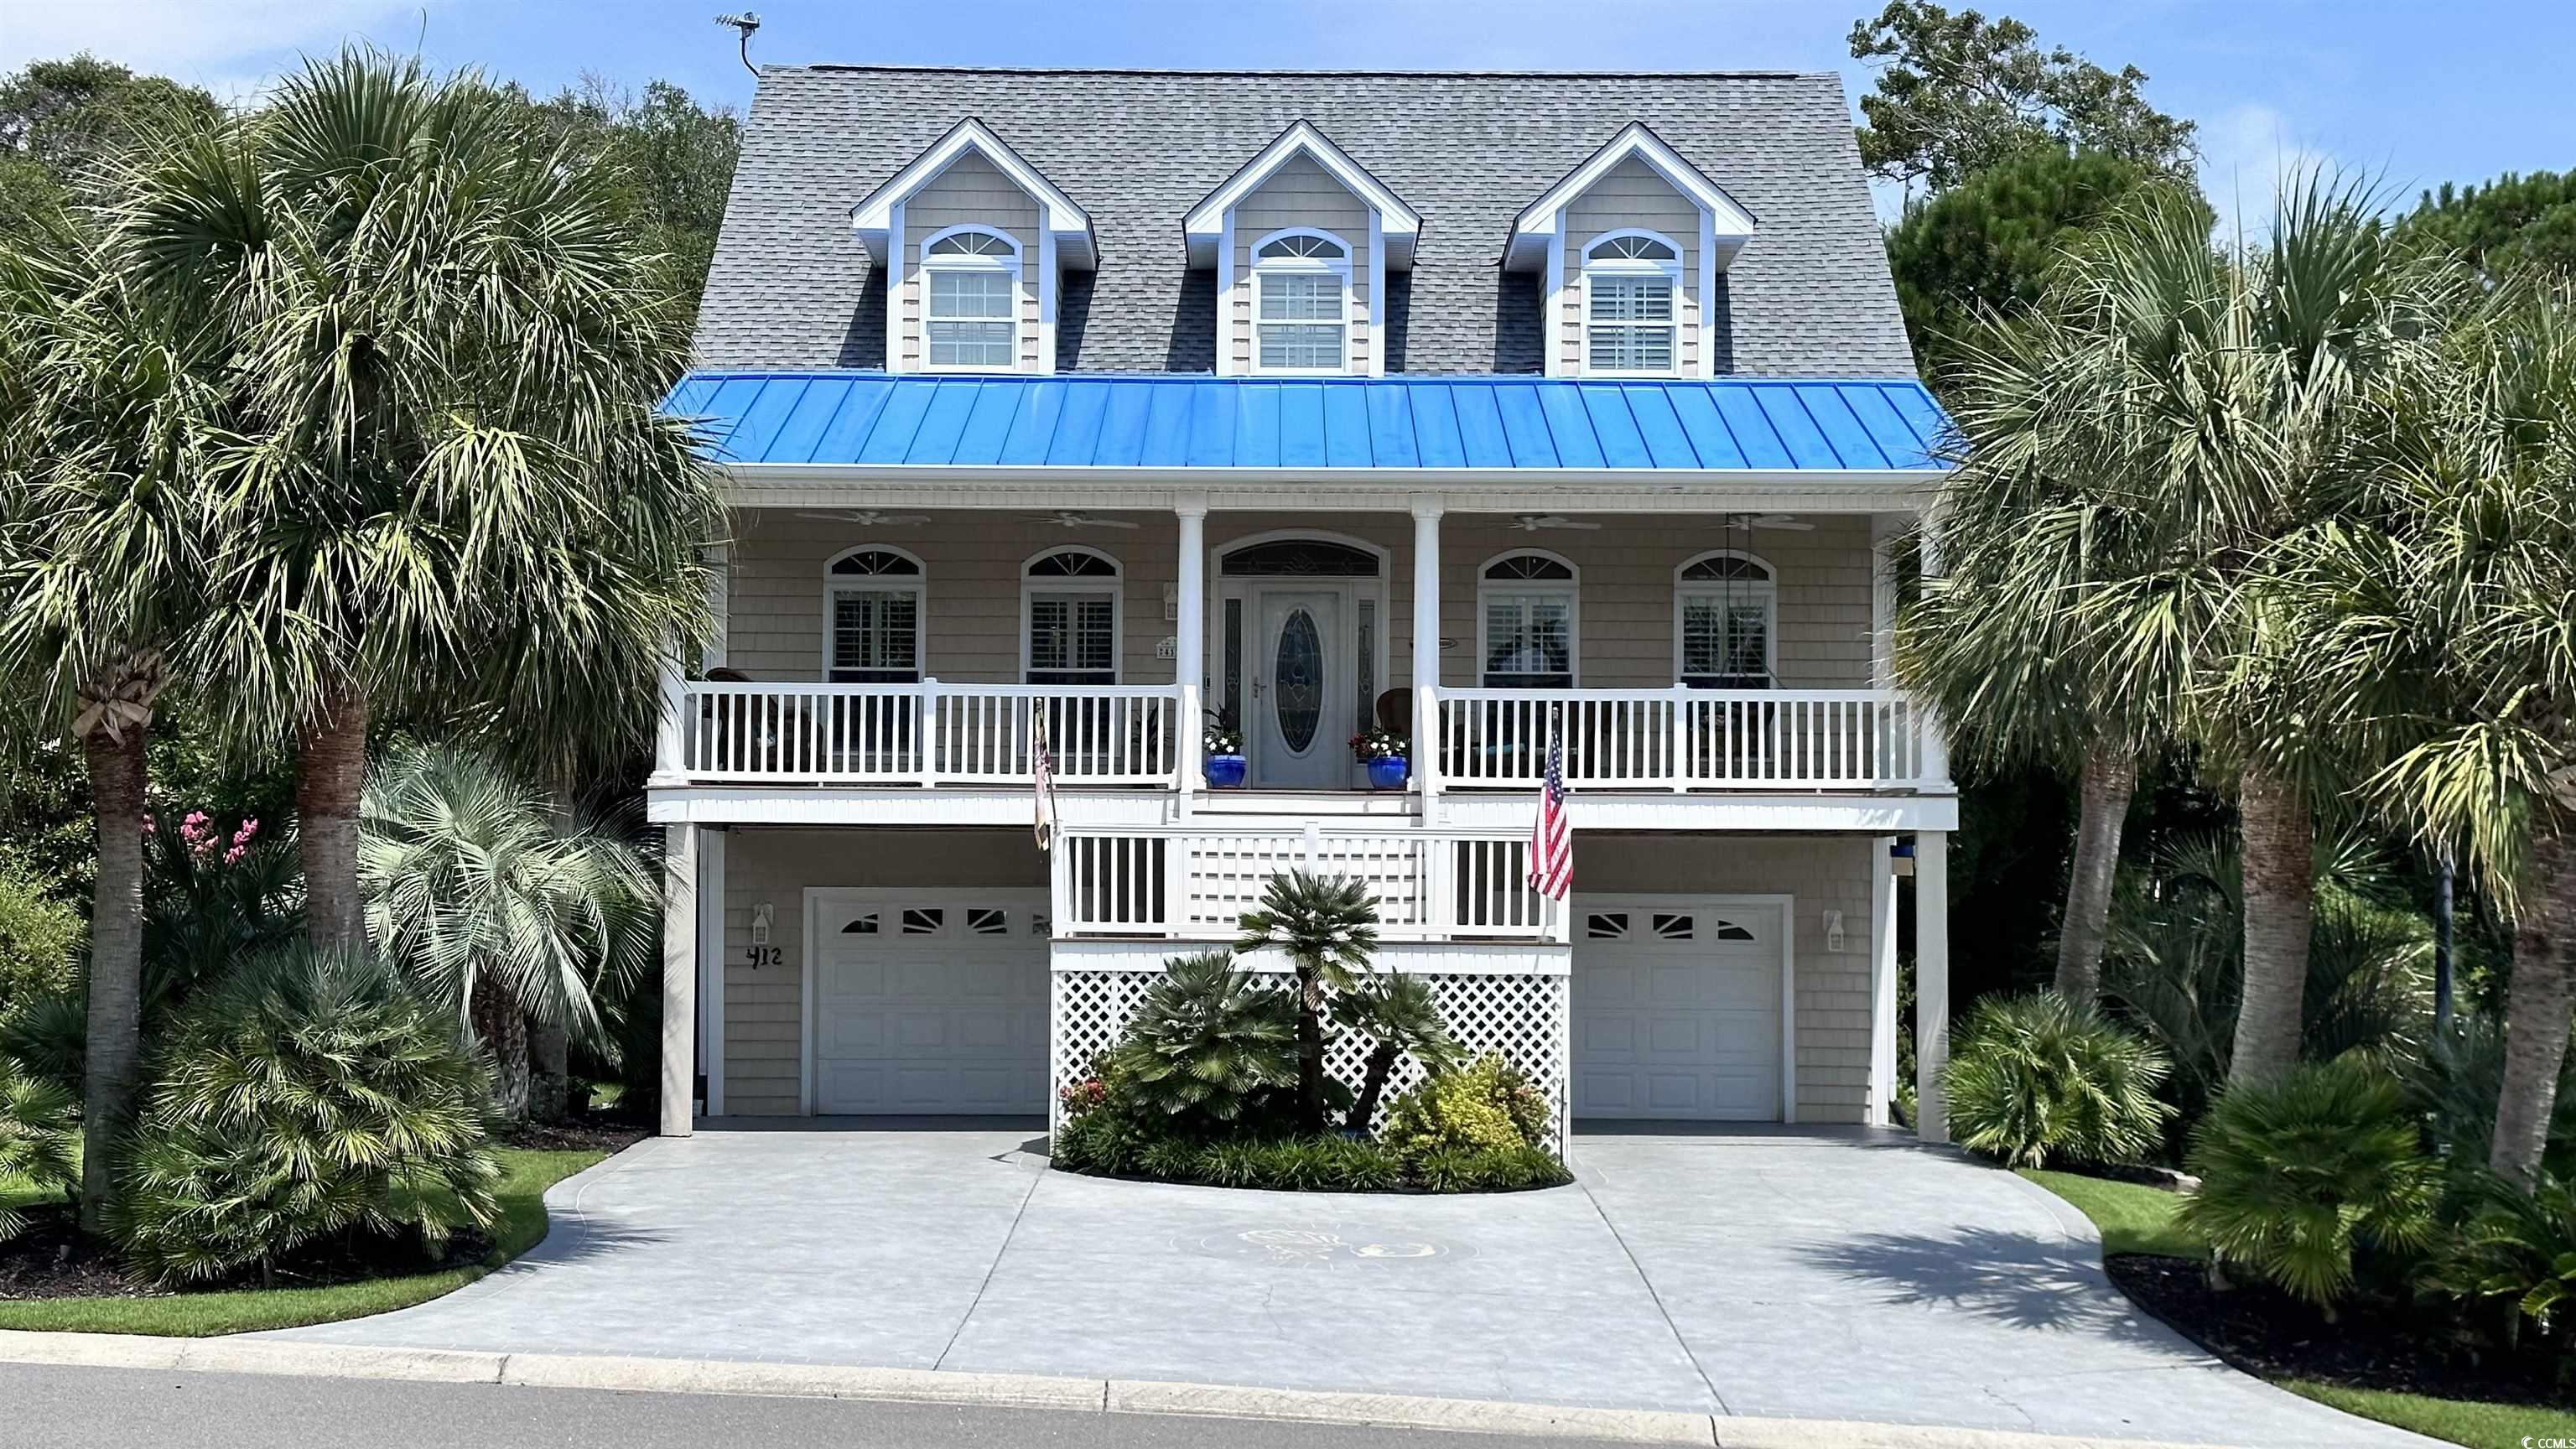 conveniently located in palms 5th avenue south, a very short walking distance to north myrtle beach main street, the shag capital of the world and yearly fun street festivals. this custom-built raised beach house with a 3-level residential elevator and heated pool , just a short 3.5 block walk or golf cart ride to the sandy shores of the atlantic ocean (see attached picture). custom upgrades galore including built in tiki bar with porcelain flooring great for parties, adjacent refrigerator with icemaker, etched/sealed driveway and parking area, parking under house for two cars and golf cart, hardwood floors on all levels, new trex decking on rear 10x16 with vinyl railings, trex flooring on large front porch with vinyl rails and ceiling fans, kitchen granite counter tops, computer area granite counter top, quartz counter tops in bathrooms with mexican talavera sinks, enclosed tiled carolina room with removable plexiglass panels for summer or winter use, downstairs ½ bath close to pool, recent hvac and pool heater replacement, wi-fi thermostats and garage door openers, covered area below rear deck with tin ceiling/ceiling fan. downtown north myrtle beach is nearby for annual festivities and mclean park for a casual stroll or picnic. local grocery, restaurants, lowes, home depot, and walmart nearby, a golf cart drive away. east side of highway 17, this property has never flooded since built as it sits on the outside edge of the fema flood maps. the heavy gauge partial blue tin roof stands out across the span of the front porch and trimming down each side of the house. hvac system replaced 2021 both inside and outside units. lg wash tower and samsung french door refrigerator convey with sale. mature palm trees and landscaping, recent new zoysia sod. great natural light, plantation shudders on front windows and upstairs front window dormers, lots and lots of storage upstairs accessible via the elevator, his/her’s walk-in closets, corner jacuzzi in master bath, cable or high-speed fiber available, remote control or wi-fi levolor shades in carolina room, irrigation with timer, free trash and recycle pickup weekly courtesy of city of north myrtle beach, low hoa fees. this house has never been smoked in. house will be available for addition costs to leave fully furnished along with outdoor pool table and custom golf cart. don’t let this one slip away, they don’t make them like this anymore!